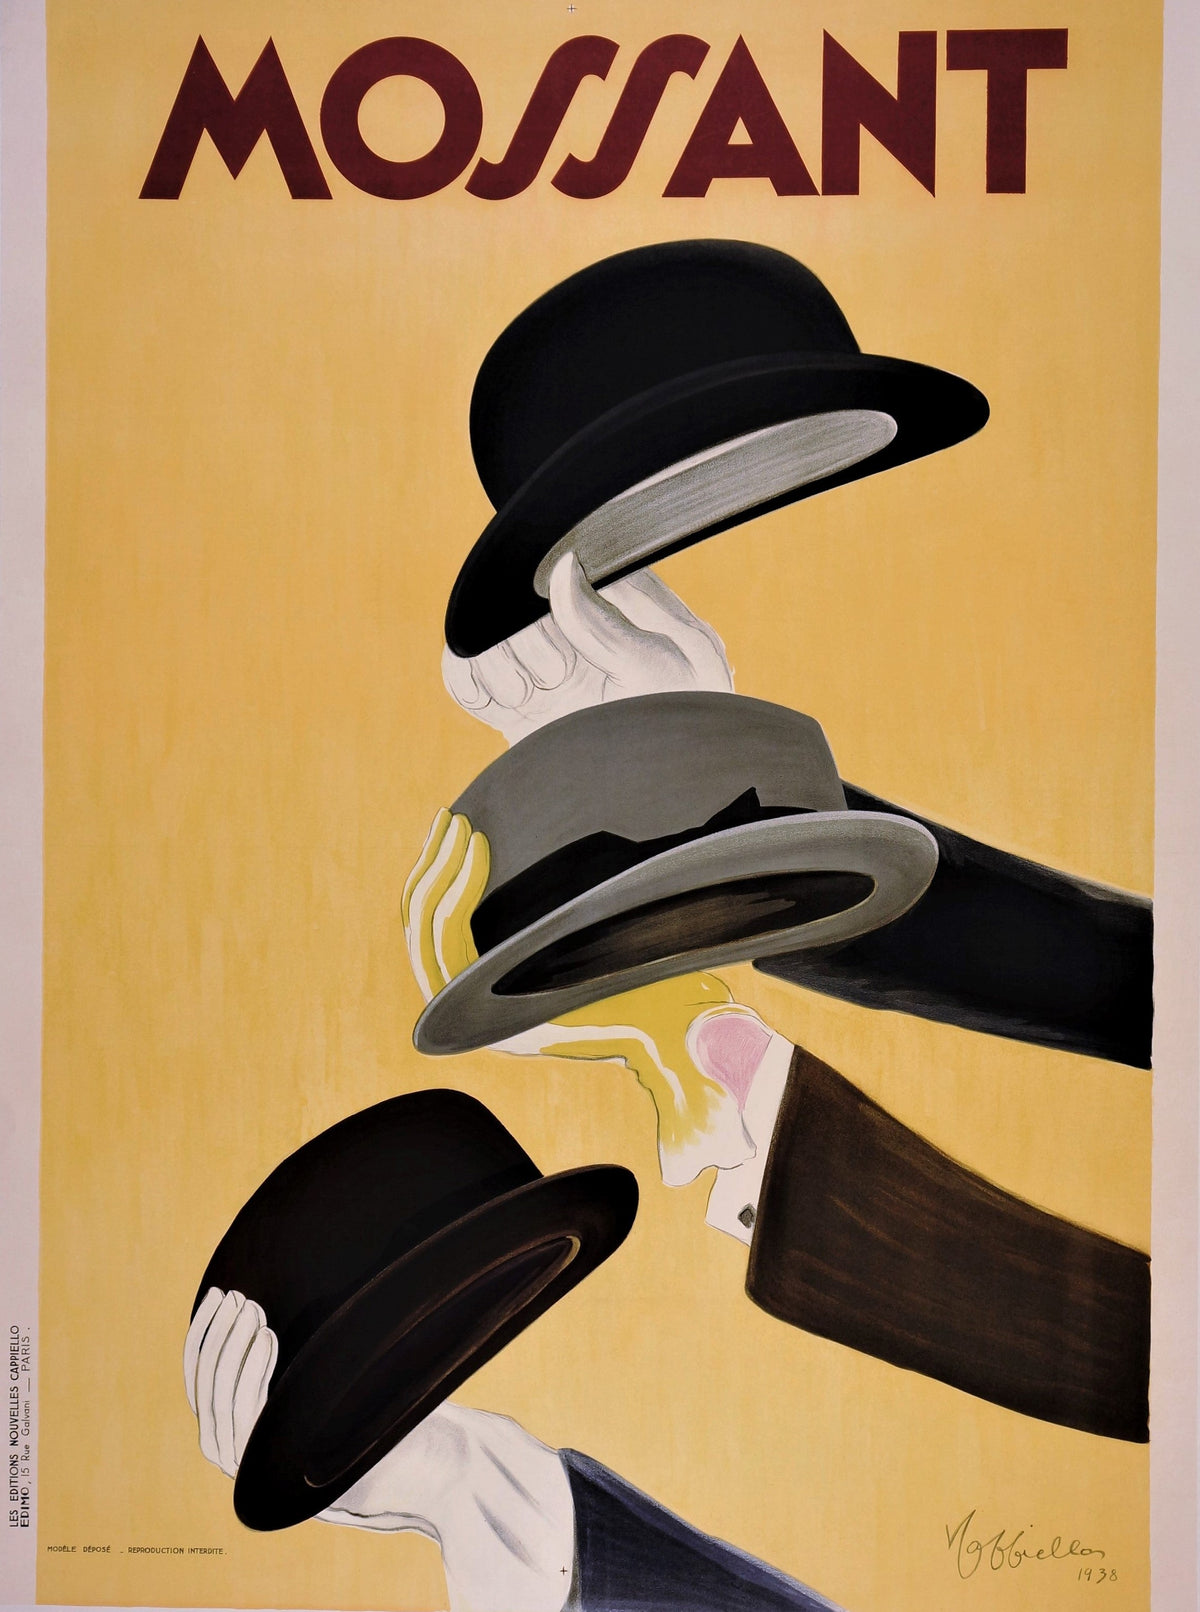 Mossant by Leonetto Cappiello - Authentic Vintage Poster